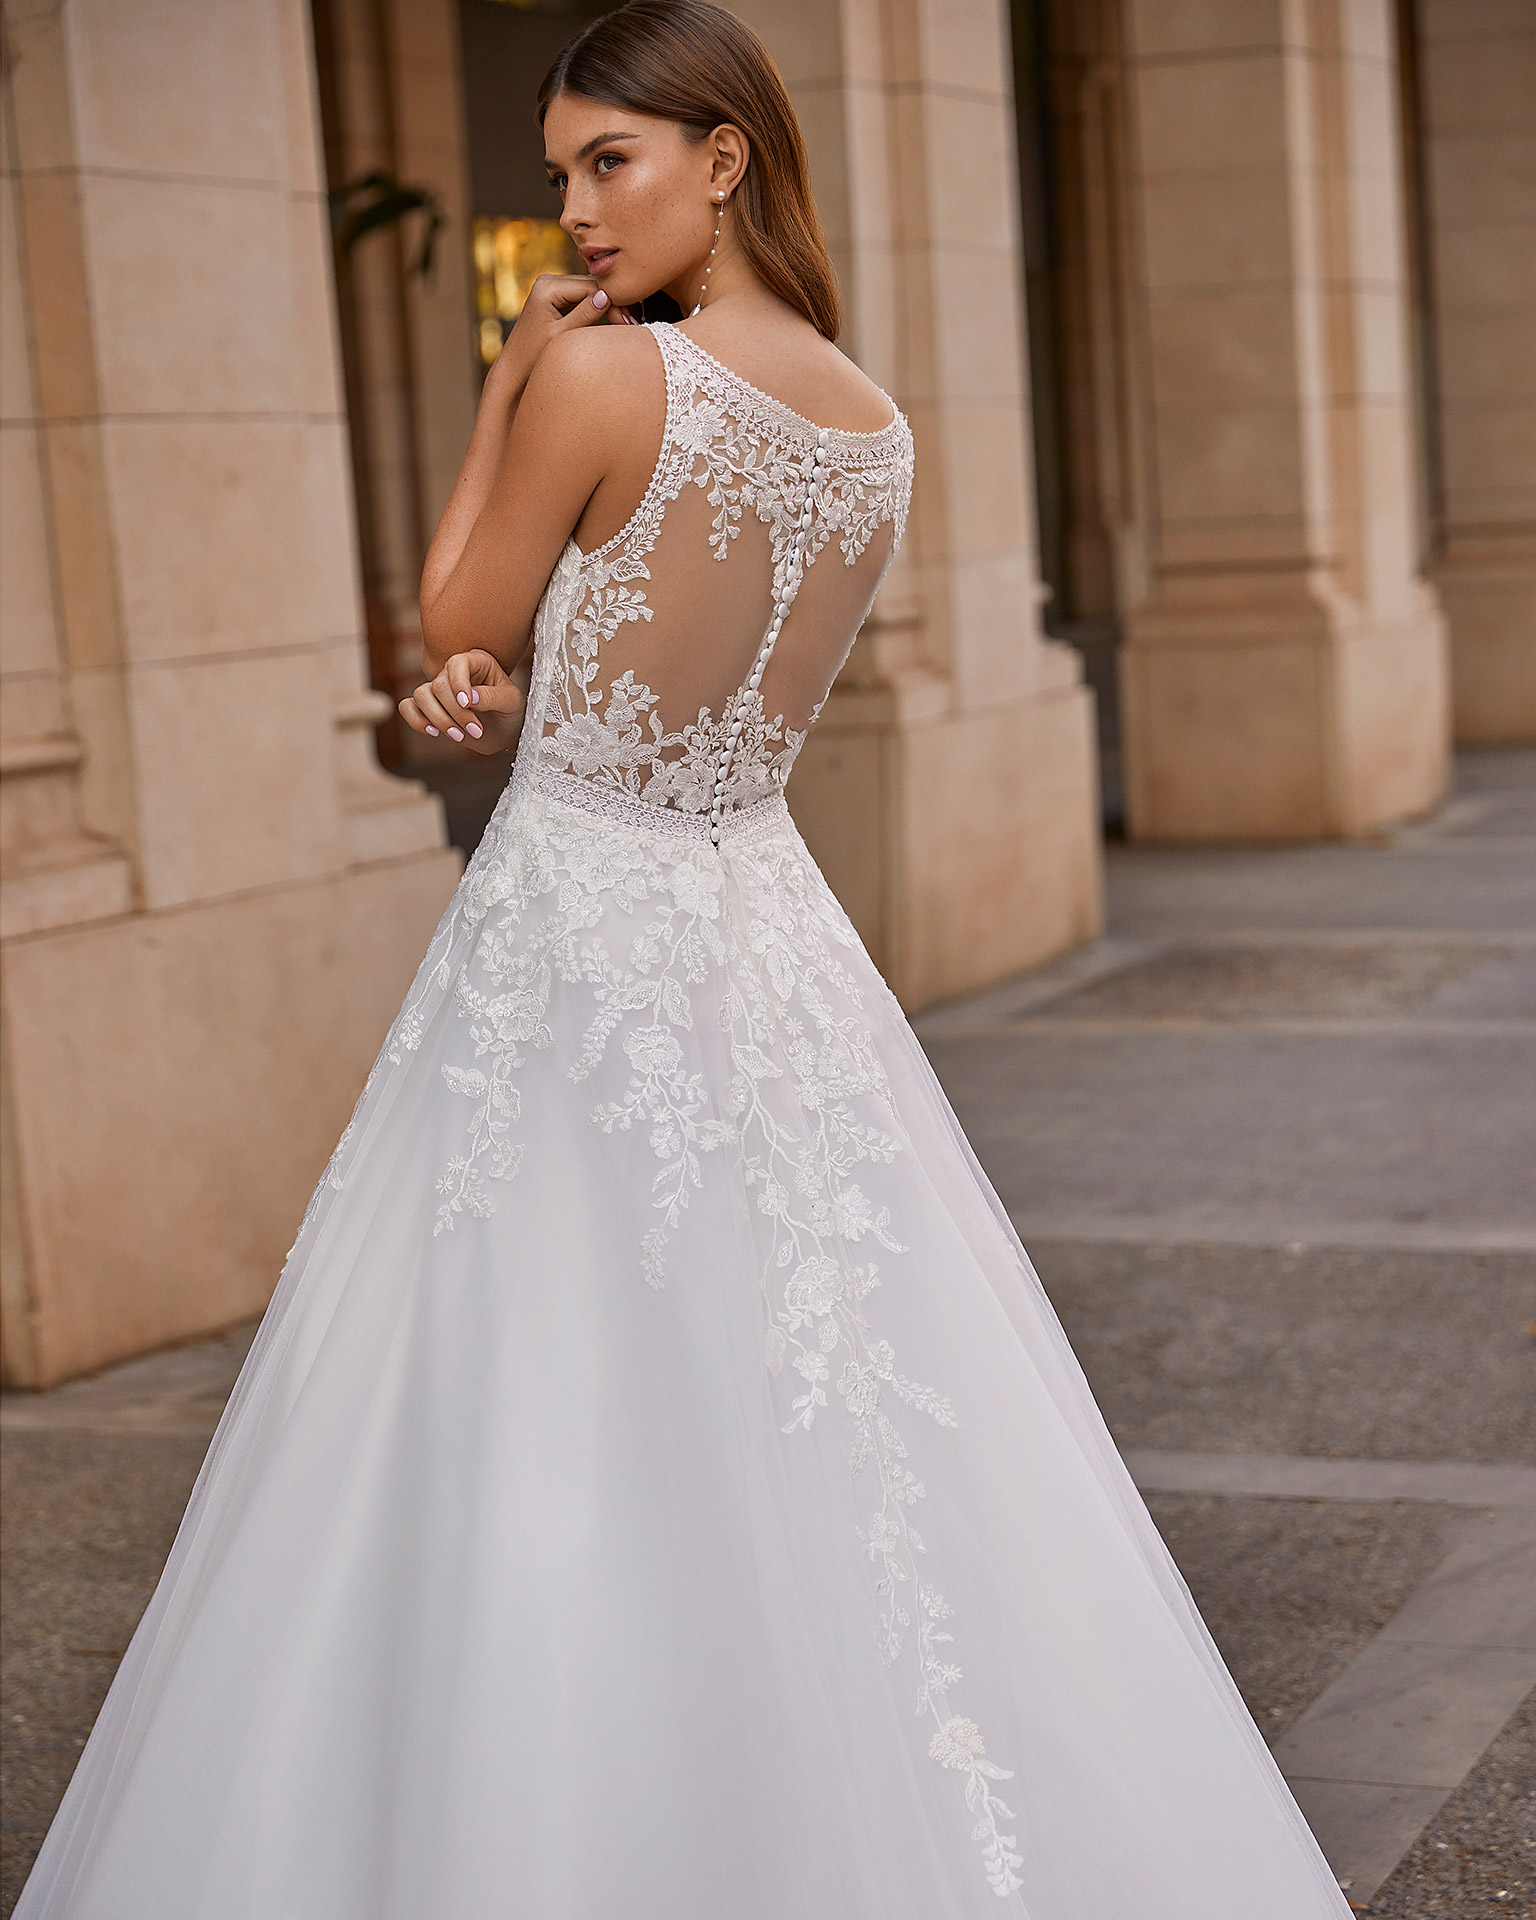 Princess-style A-line wedding dress, made of tulle with lace appliqués; with a deep-plunge neckline, and a button-up back with sheer inserts. Exclusive Luna Novias dress made of tulle with beadwork and lace appliqués. LUNA_NOVIAS.